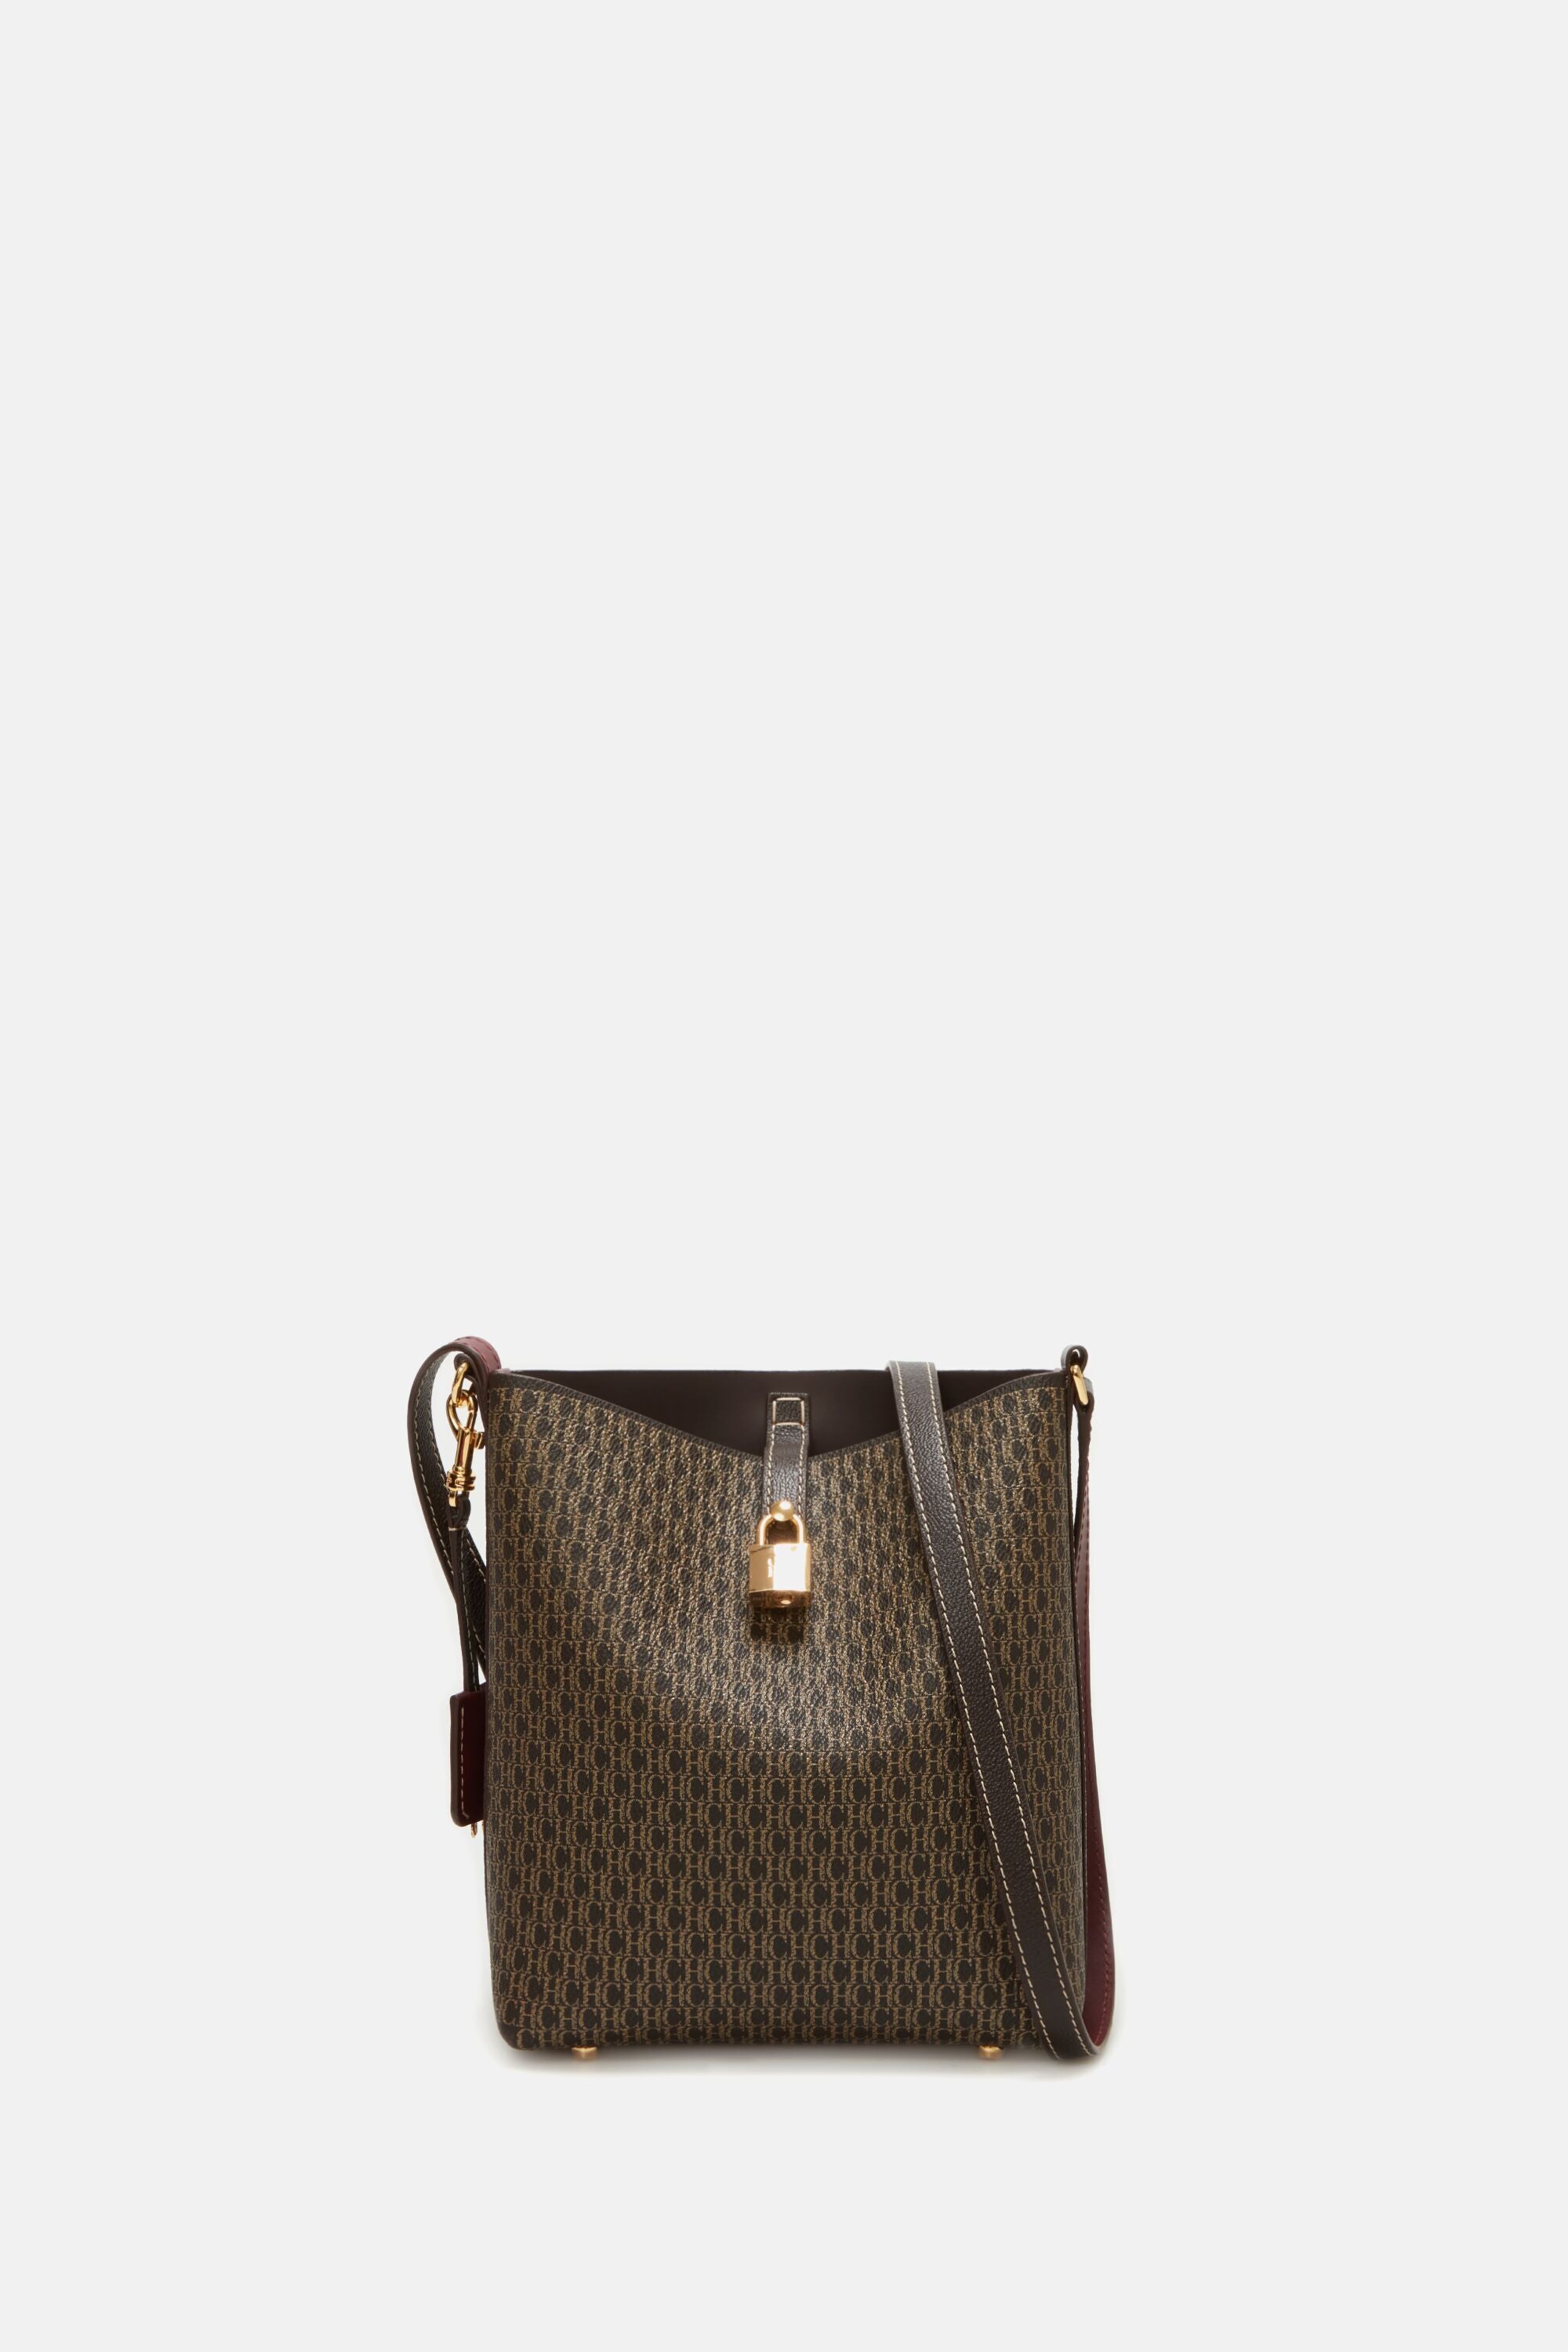 Gucci Bags, 8.8 Sale Up To 80%